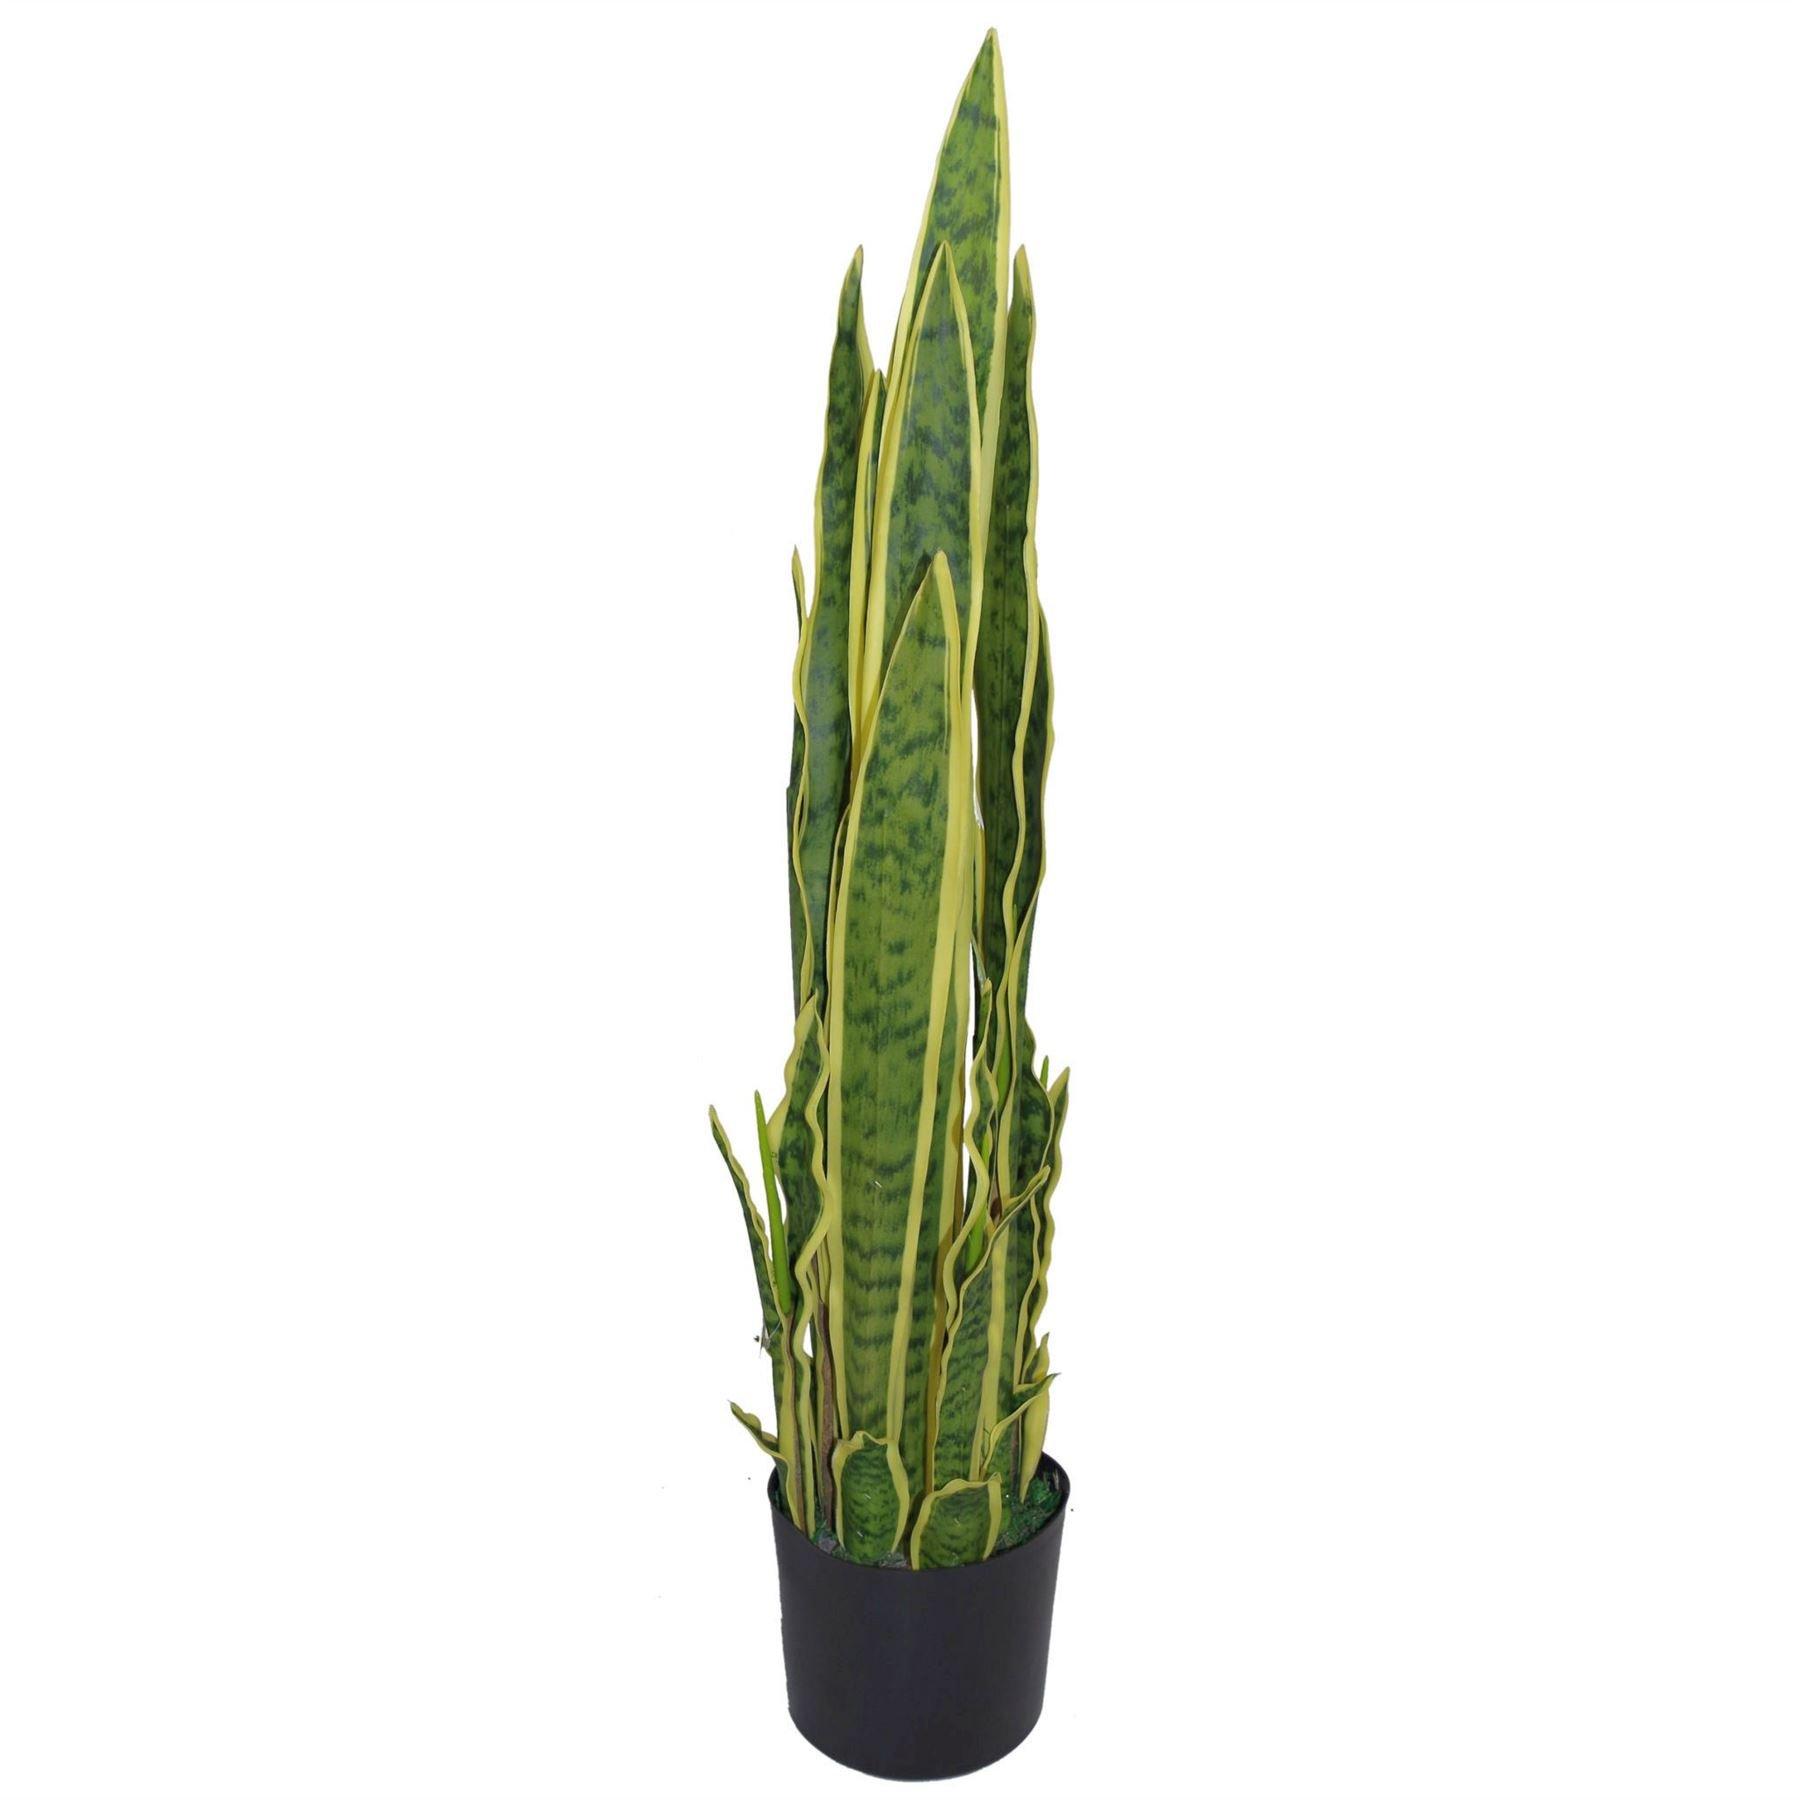 90cm (3ft) Artificial Sansevieria Yellow Green Indoor Plant - Large